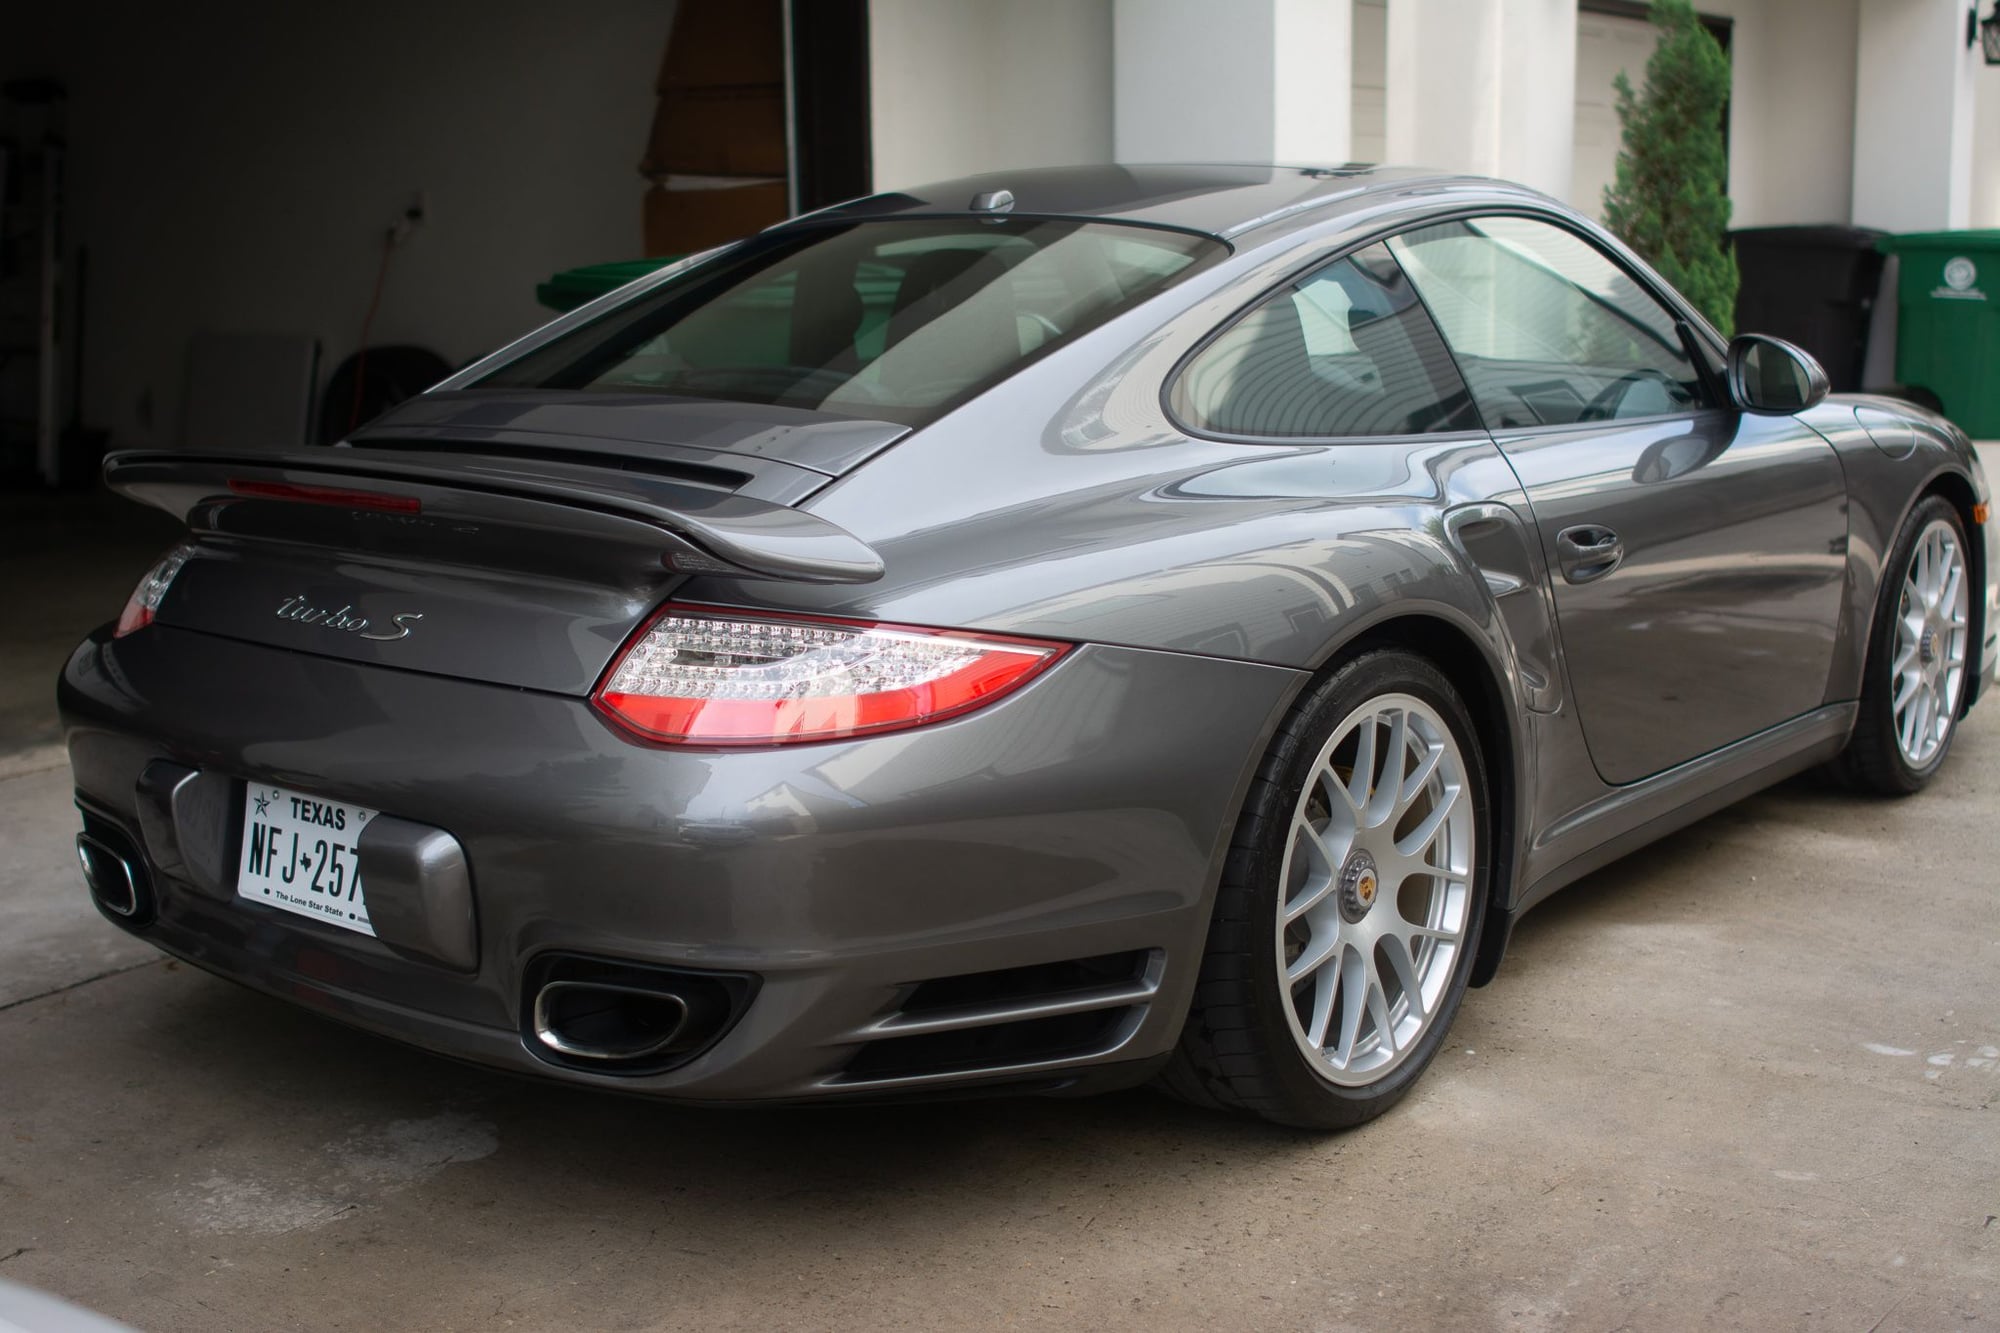 2011 Porsche 911 - CPO 2011 911 Turbo S Meteor Grey/Sea Blue Full Leather 24.5k miles - Used - VIN WP0AD2A94BS766483 - 24,500 Miles - 6 cyl - AWD - Automatic - Coupe - Gray - Houston, TX 77008, United States